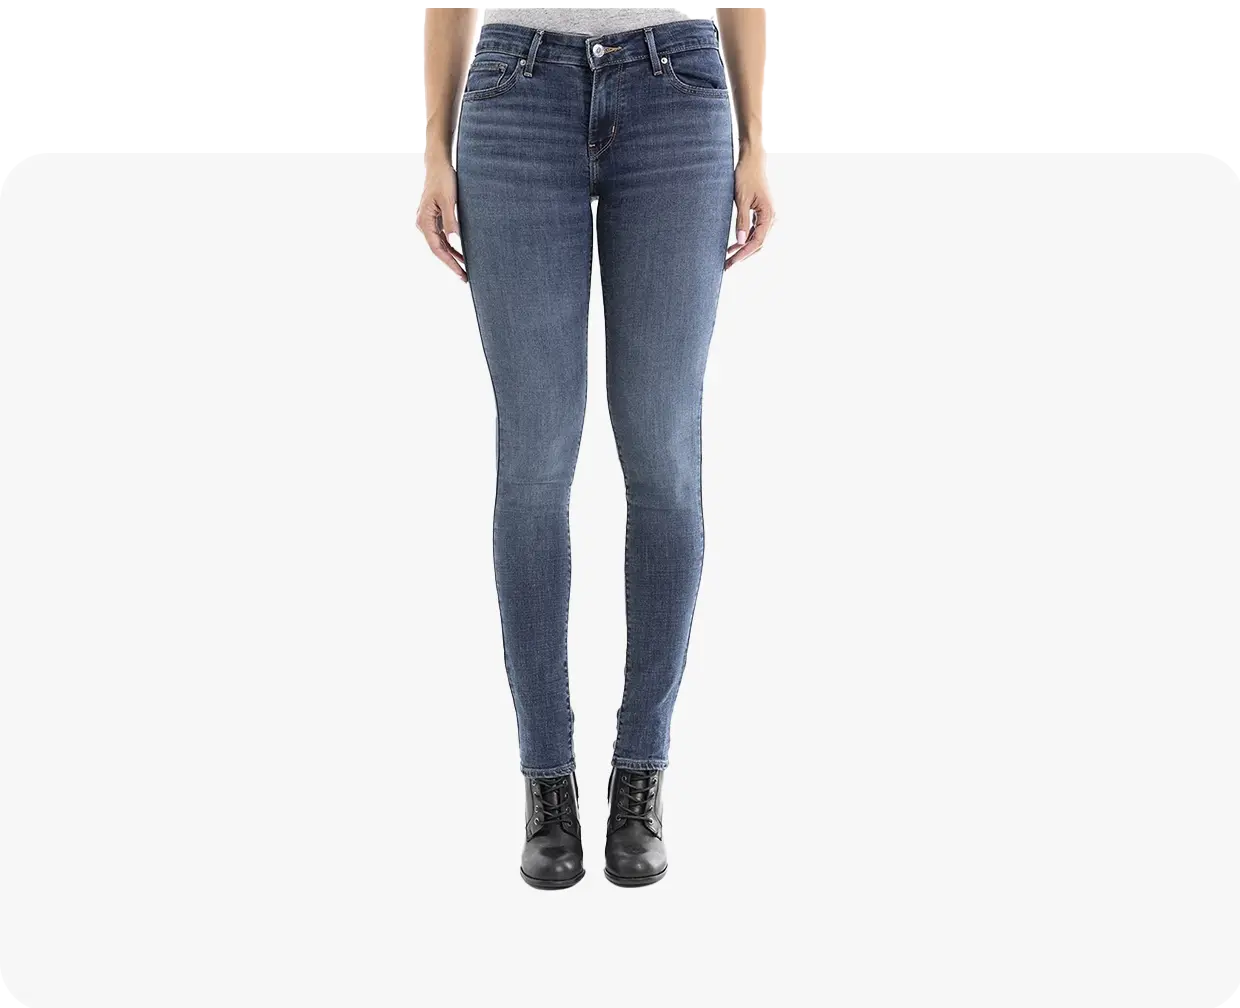 Jeans Levis Para Mujer